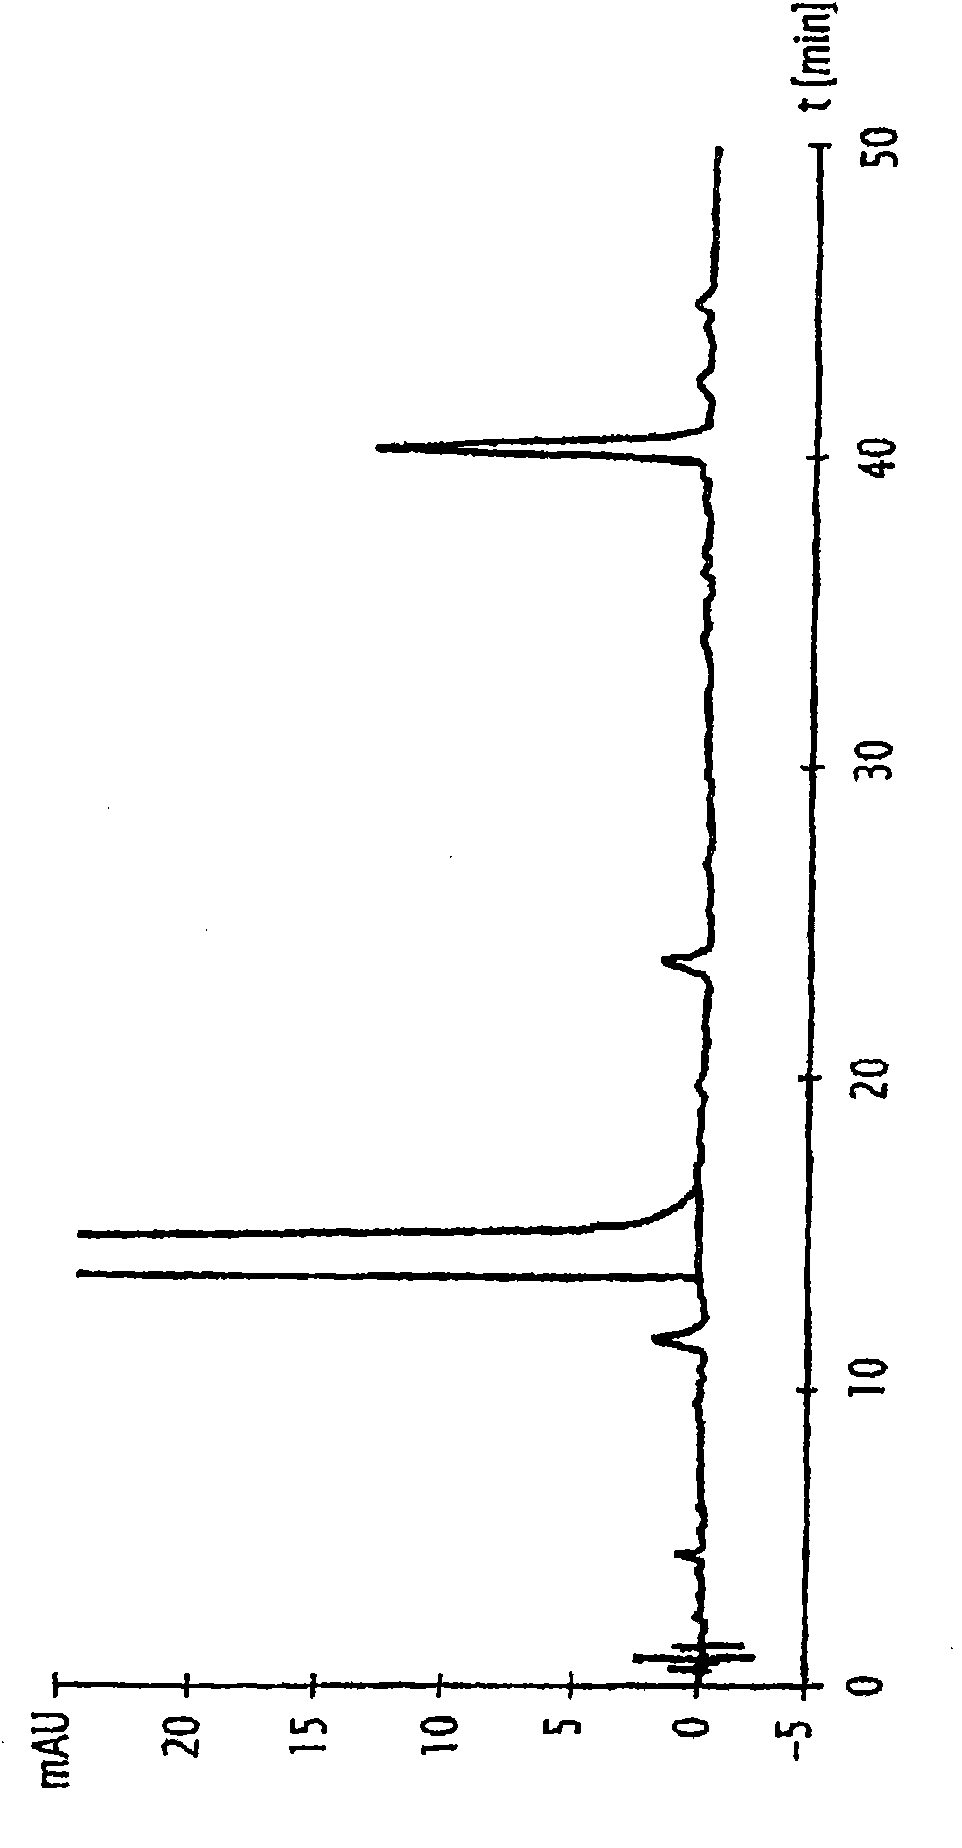 Method for the preparation of morphine compounds